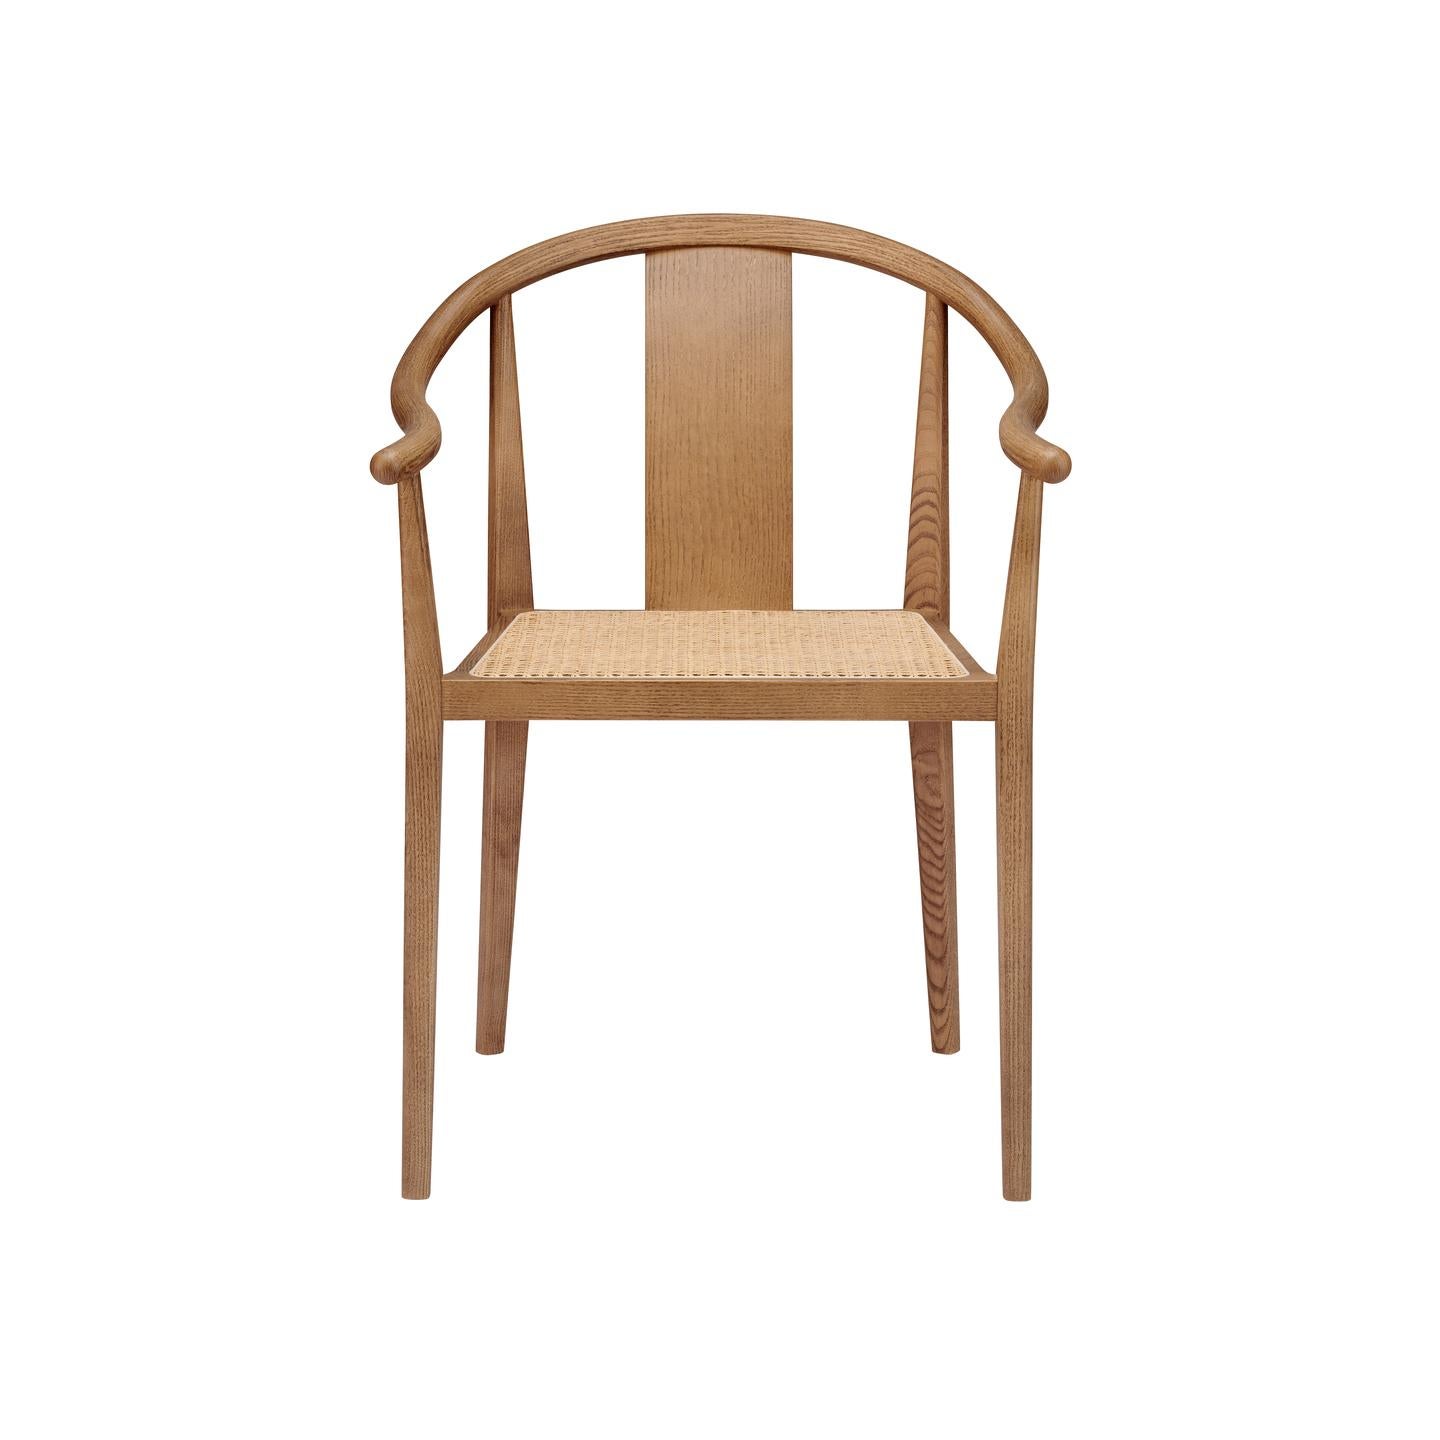 'Shanghai' Chair by Norr11, Light Smoked Oak, Natural Rattan For Sale 9